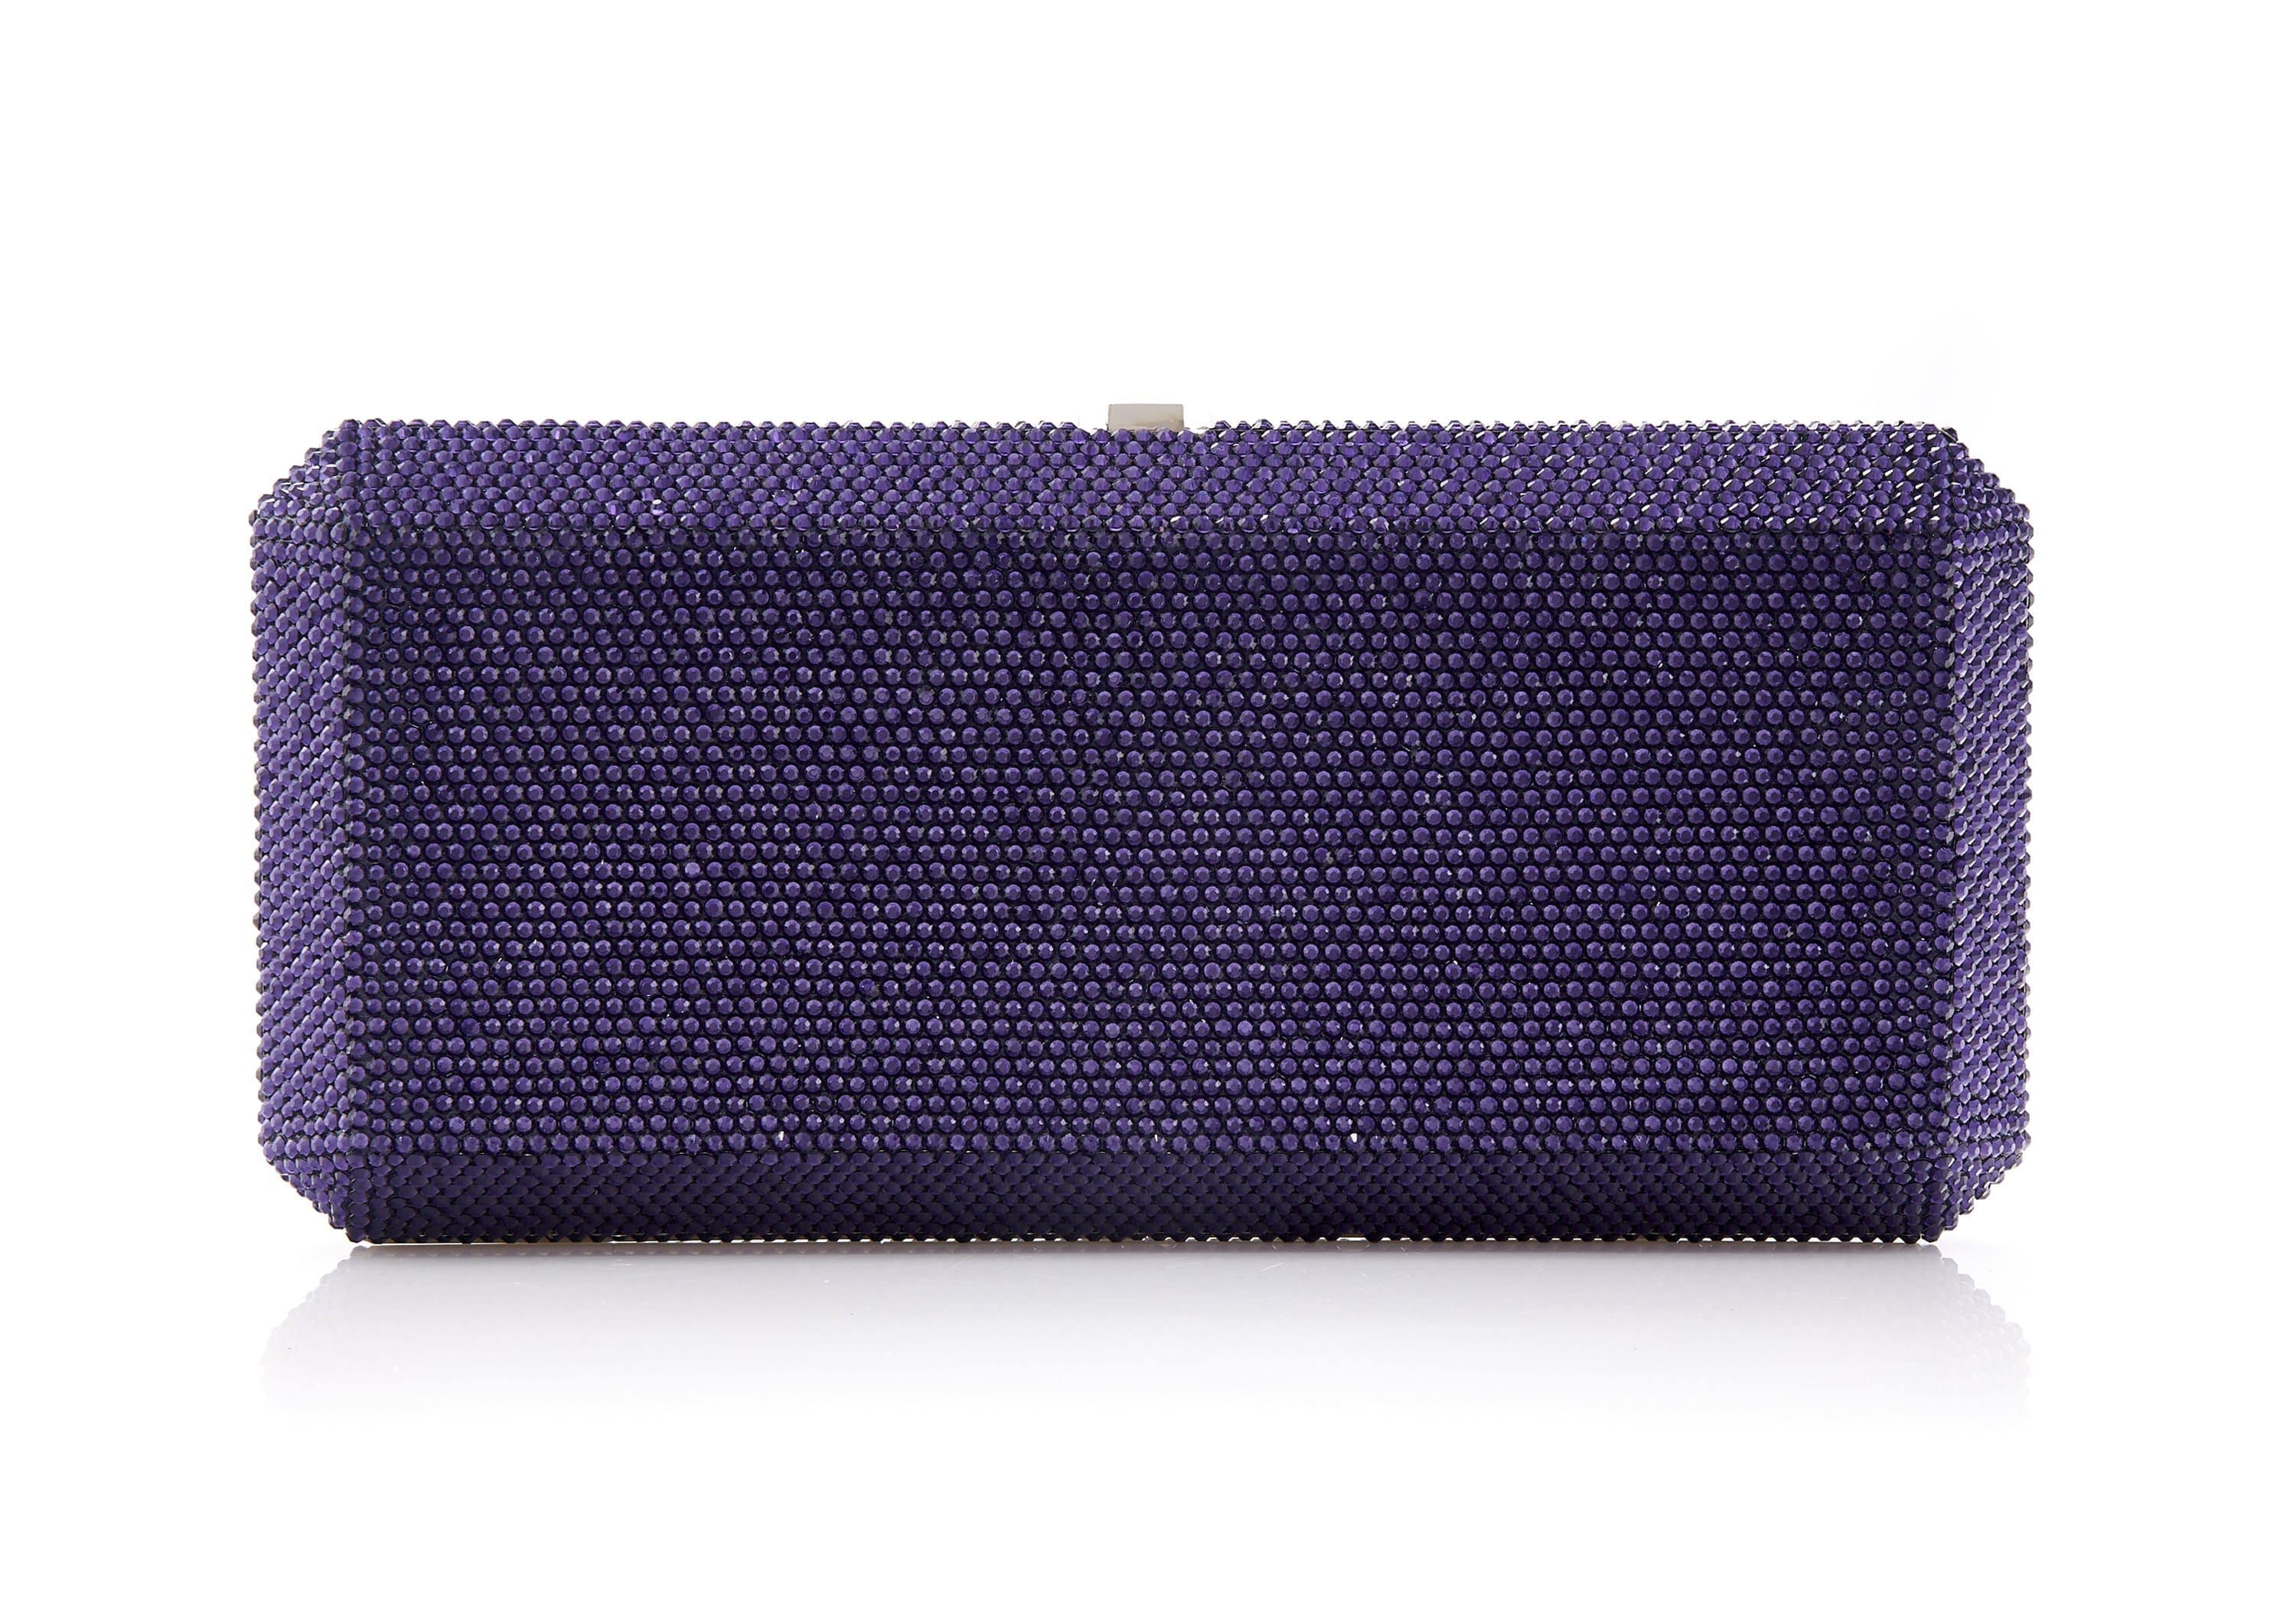 Judith Leiber Couture Slim Rectangle Clutch